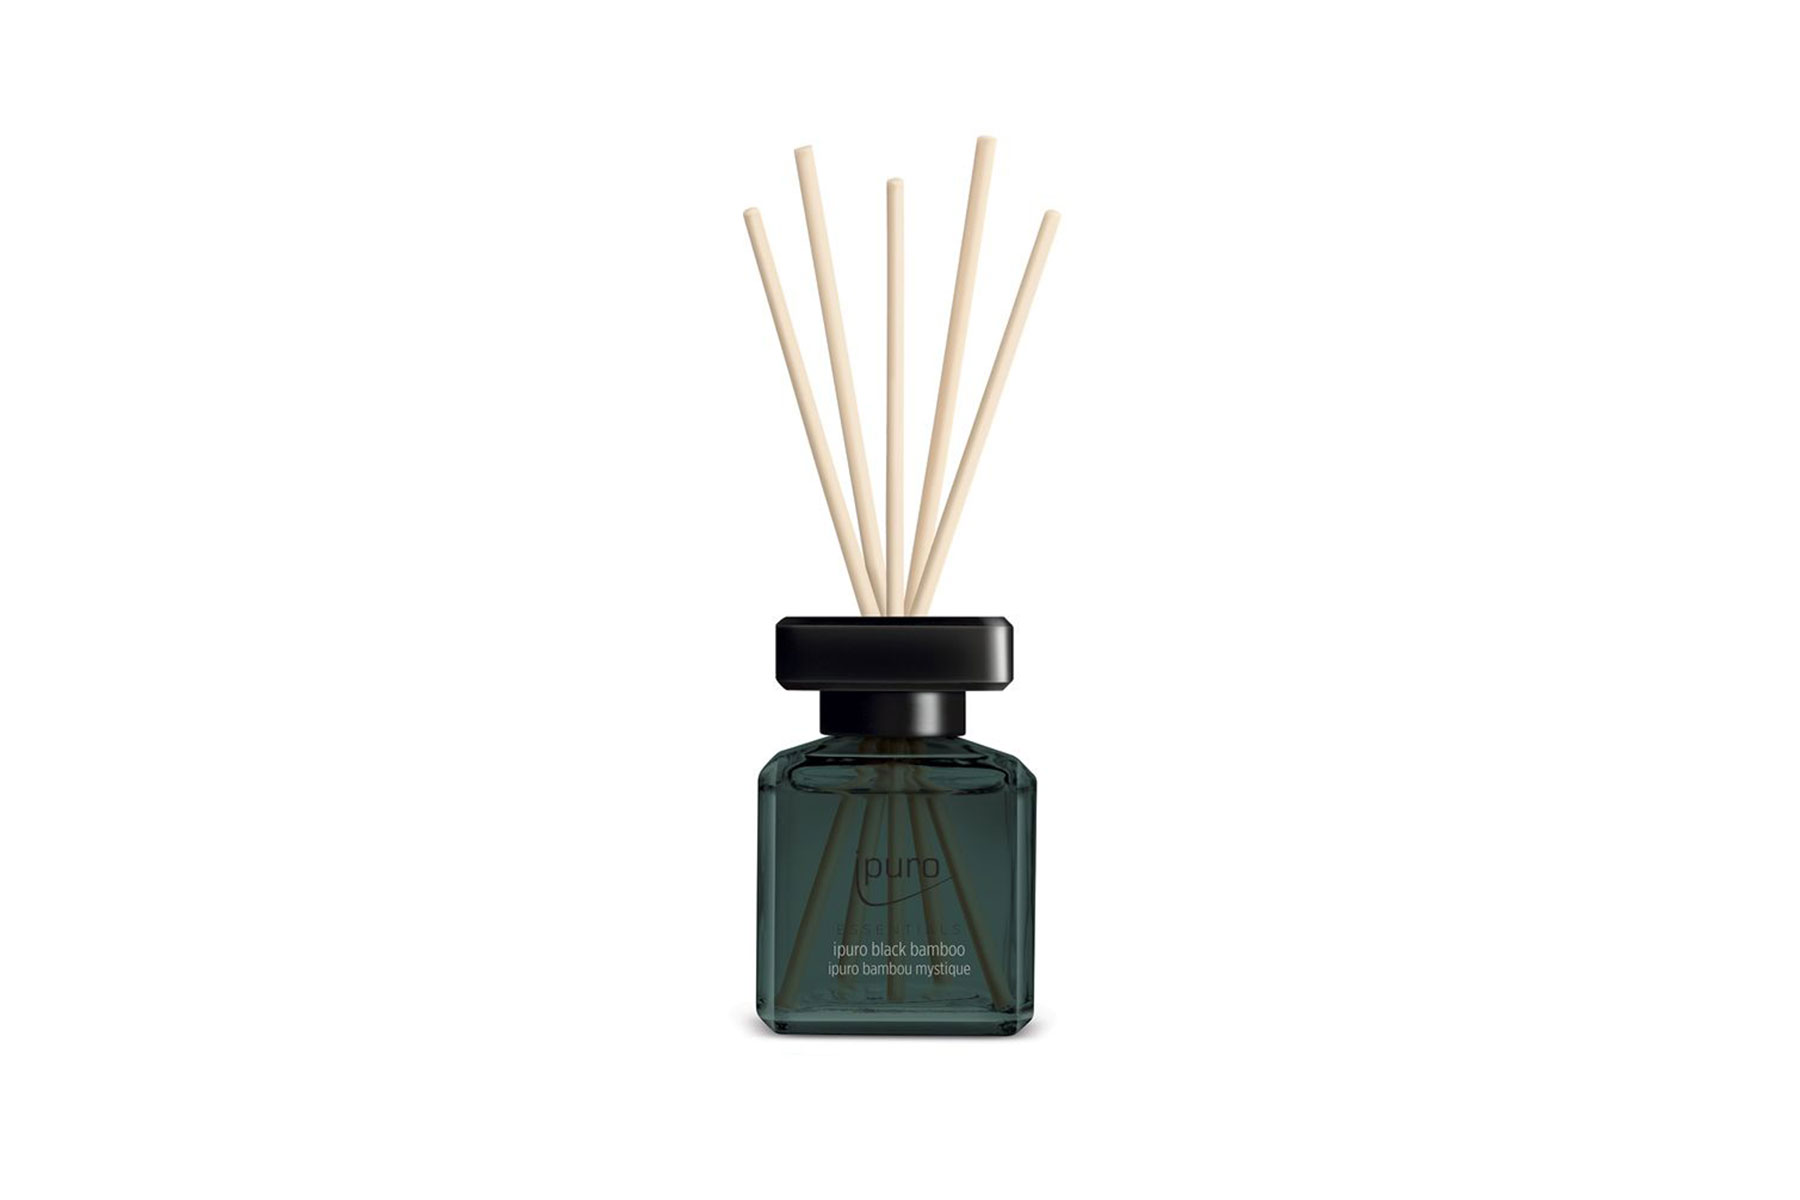 Essentials by Ipuro Black Bamboo Room Fragrance 50 ml (Pack of 3